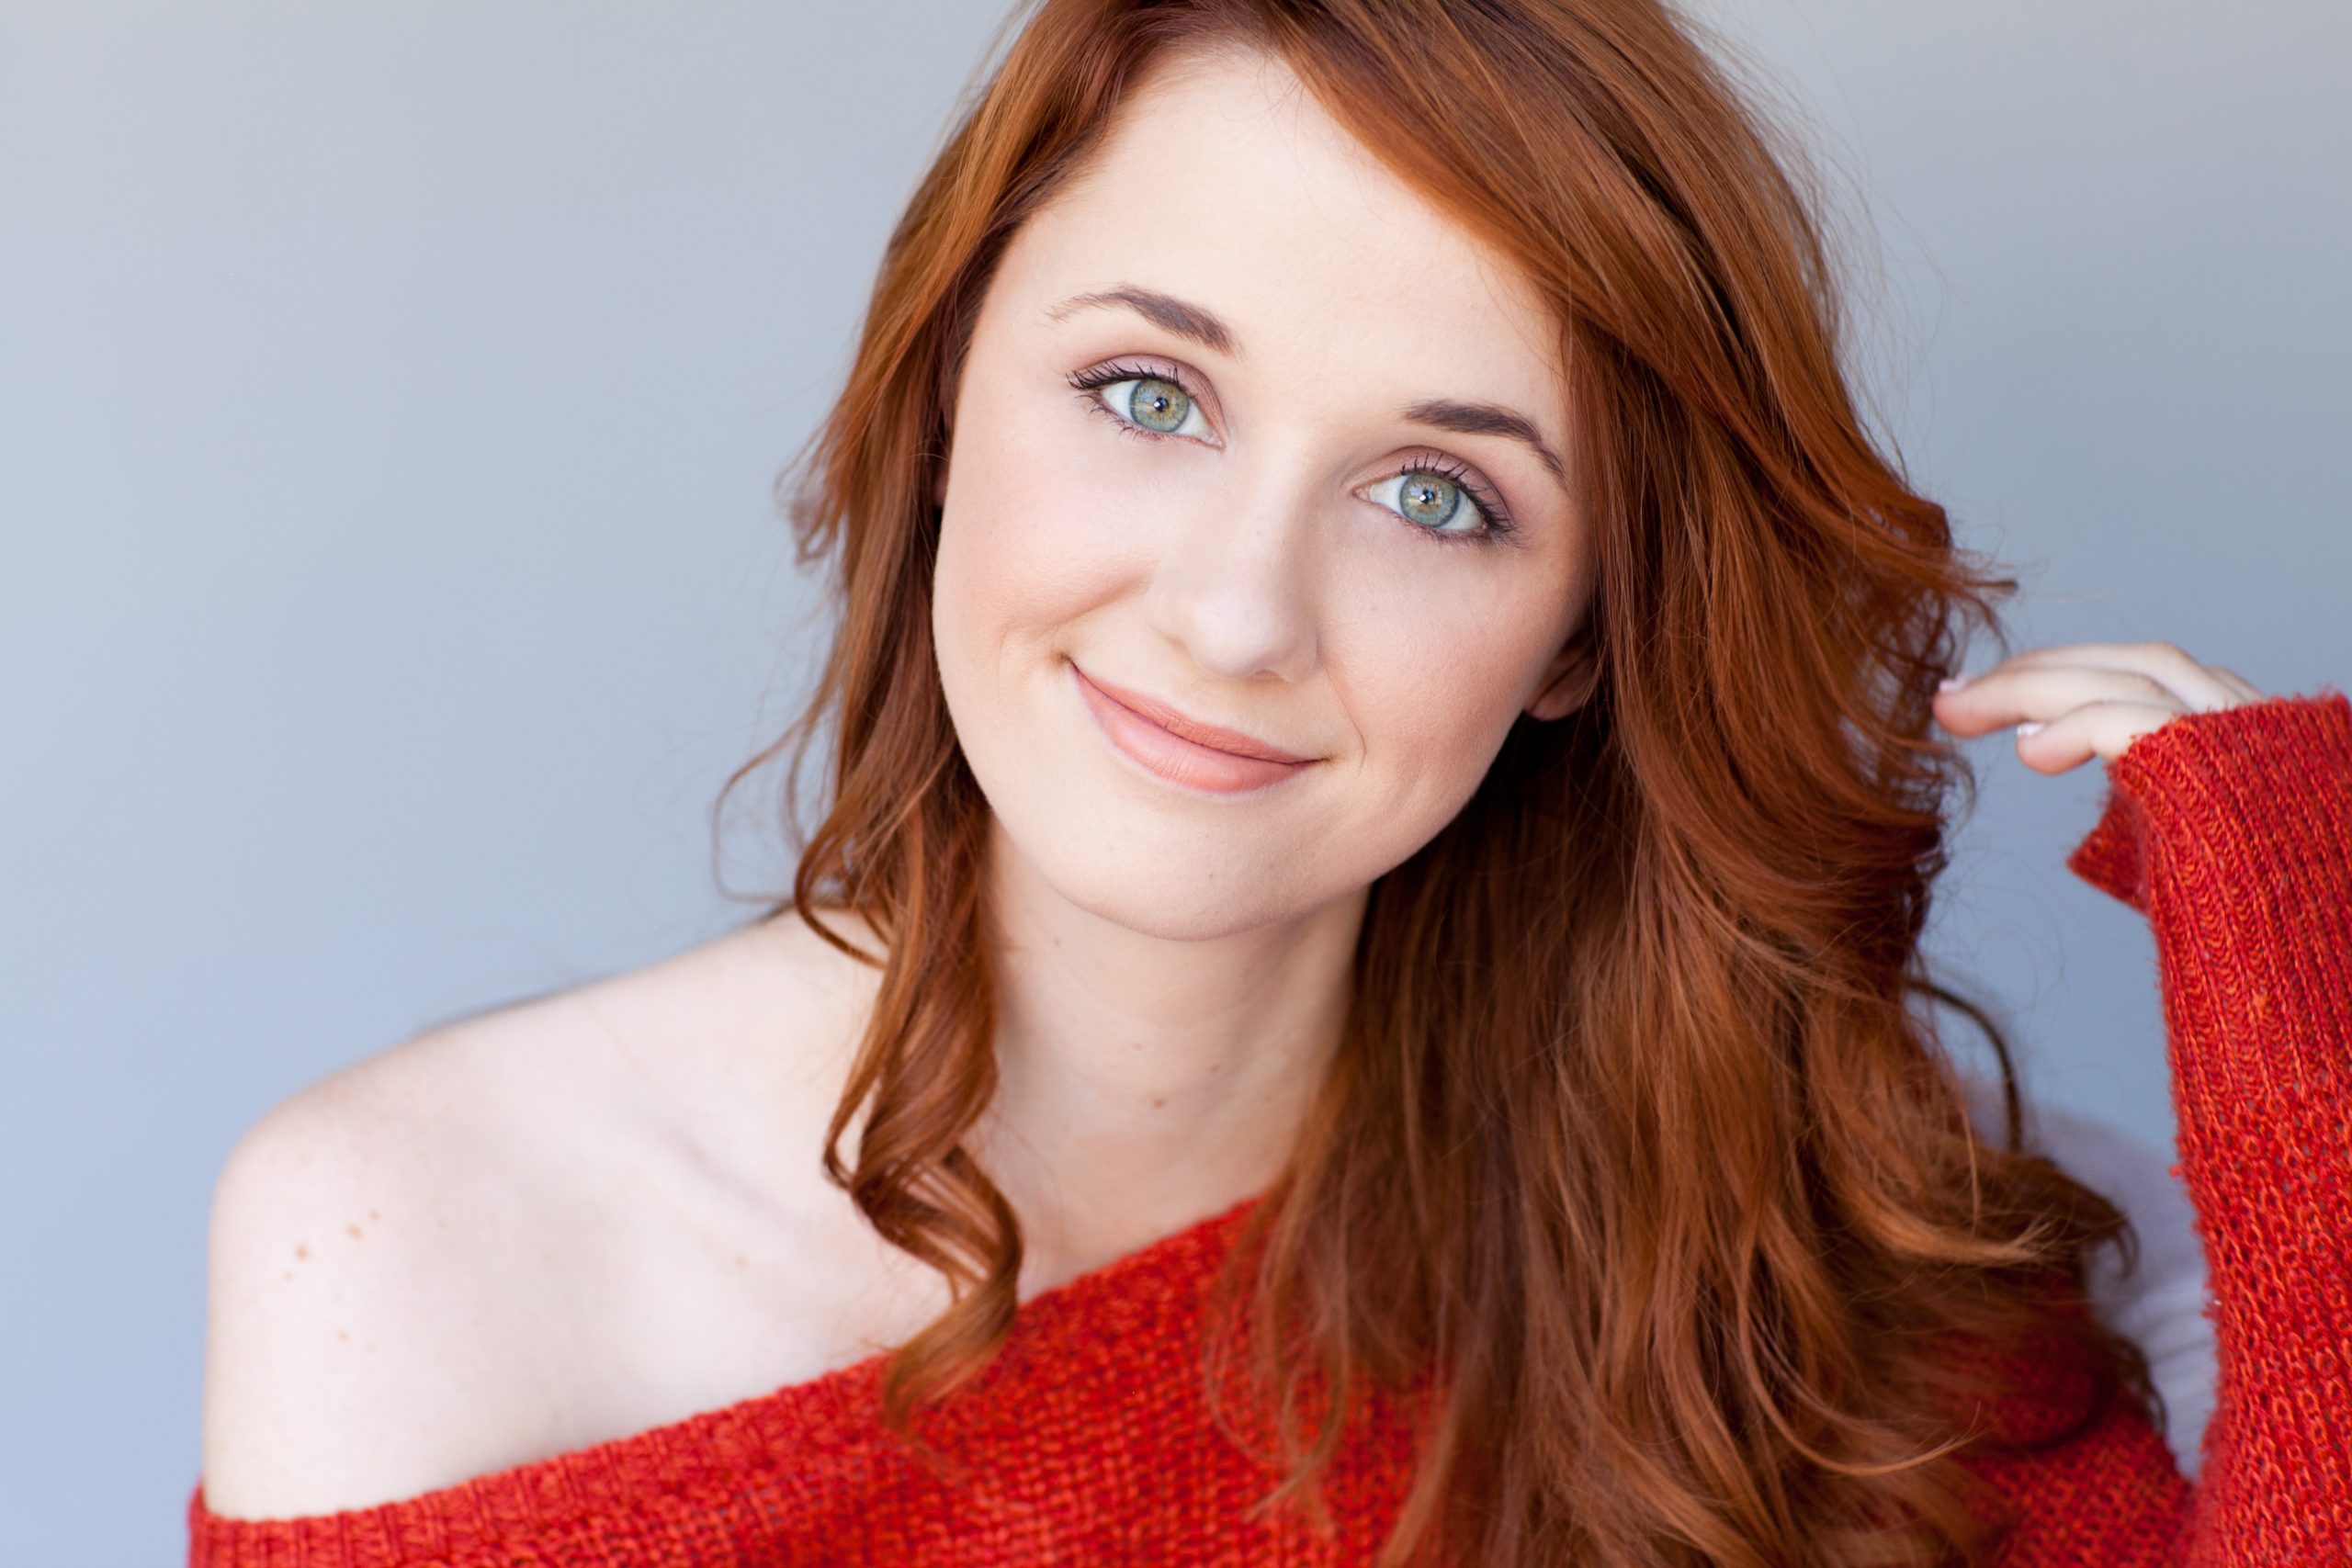 For today’s topic, we decided to focus on Laura Spencer’s beauty and achiev...